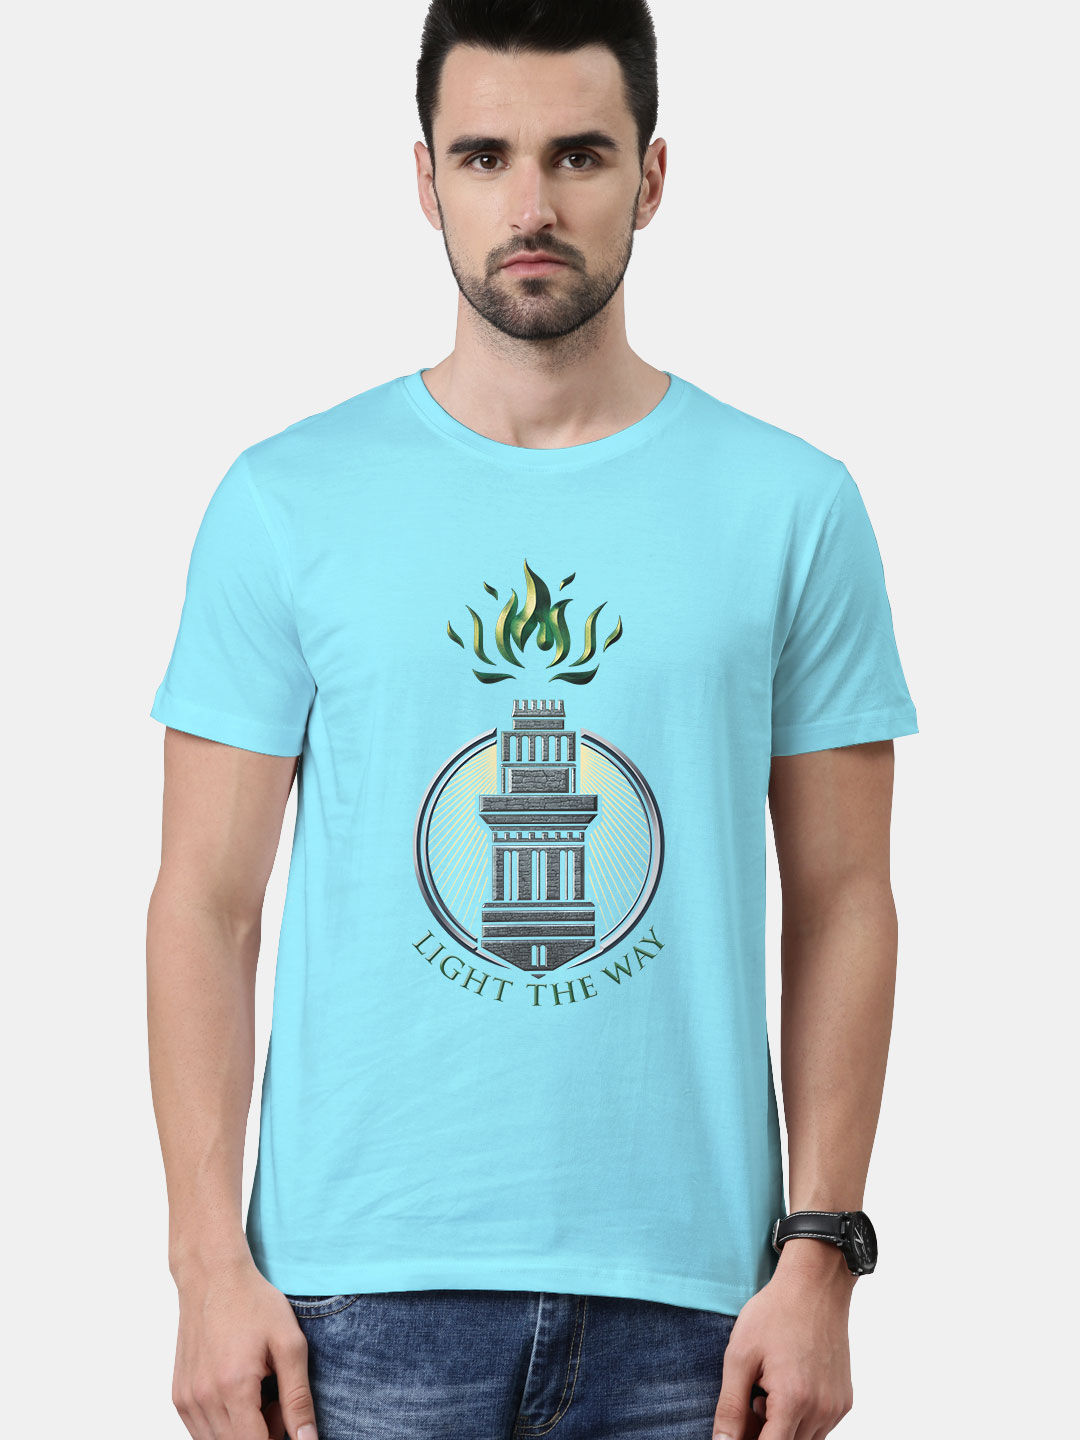 Buy Light the Way Front Sky Blue - Male Designer T-Shirts T-Shirts Online